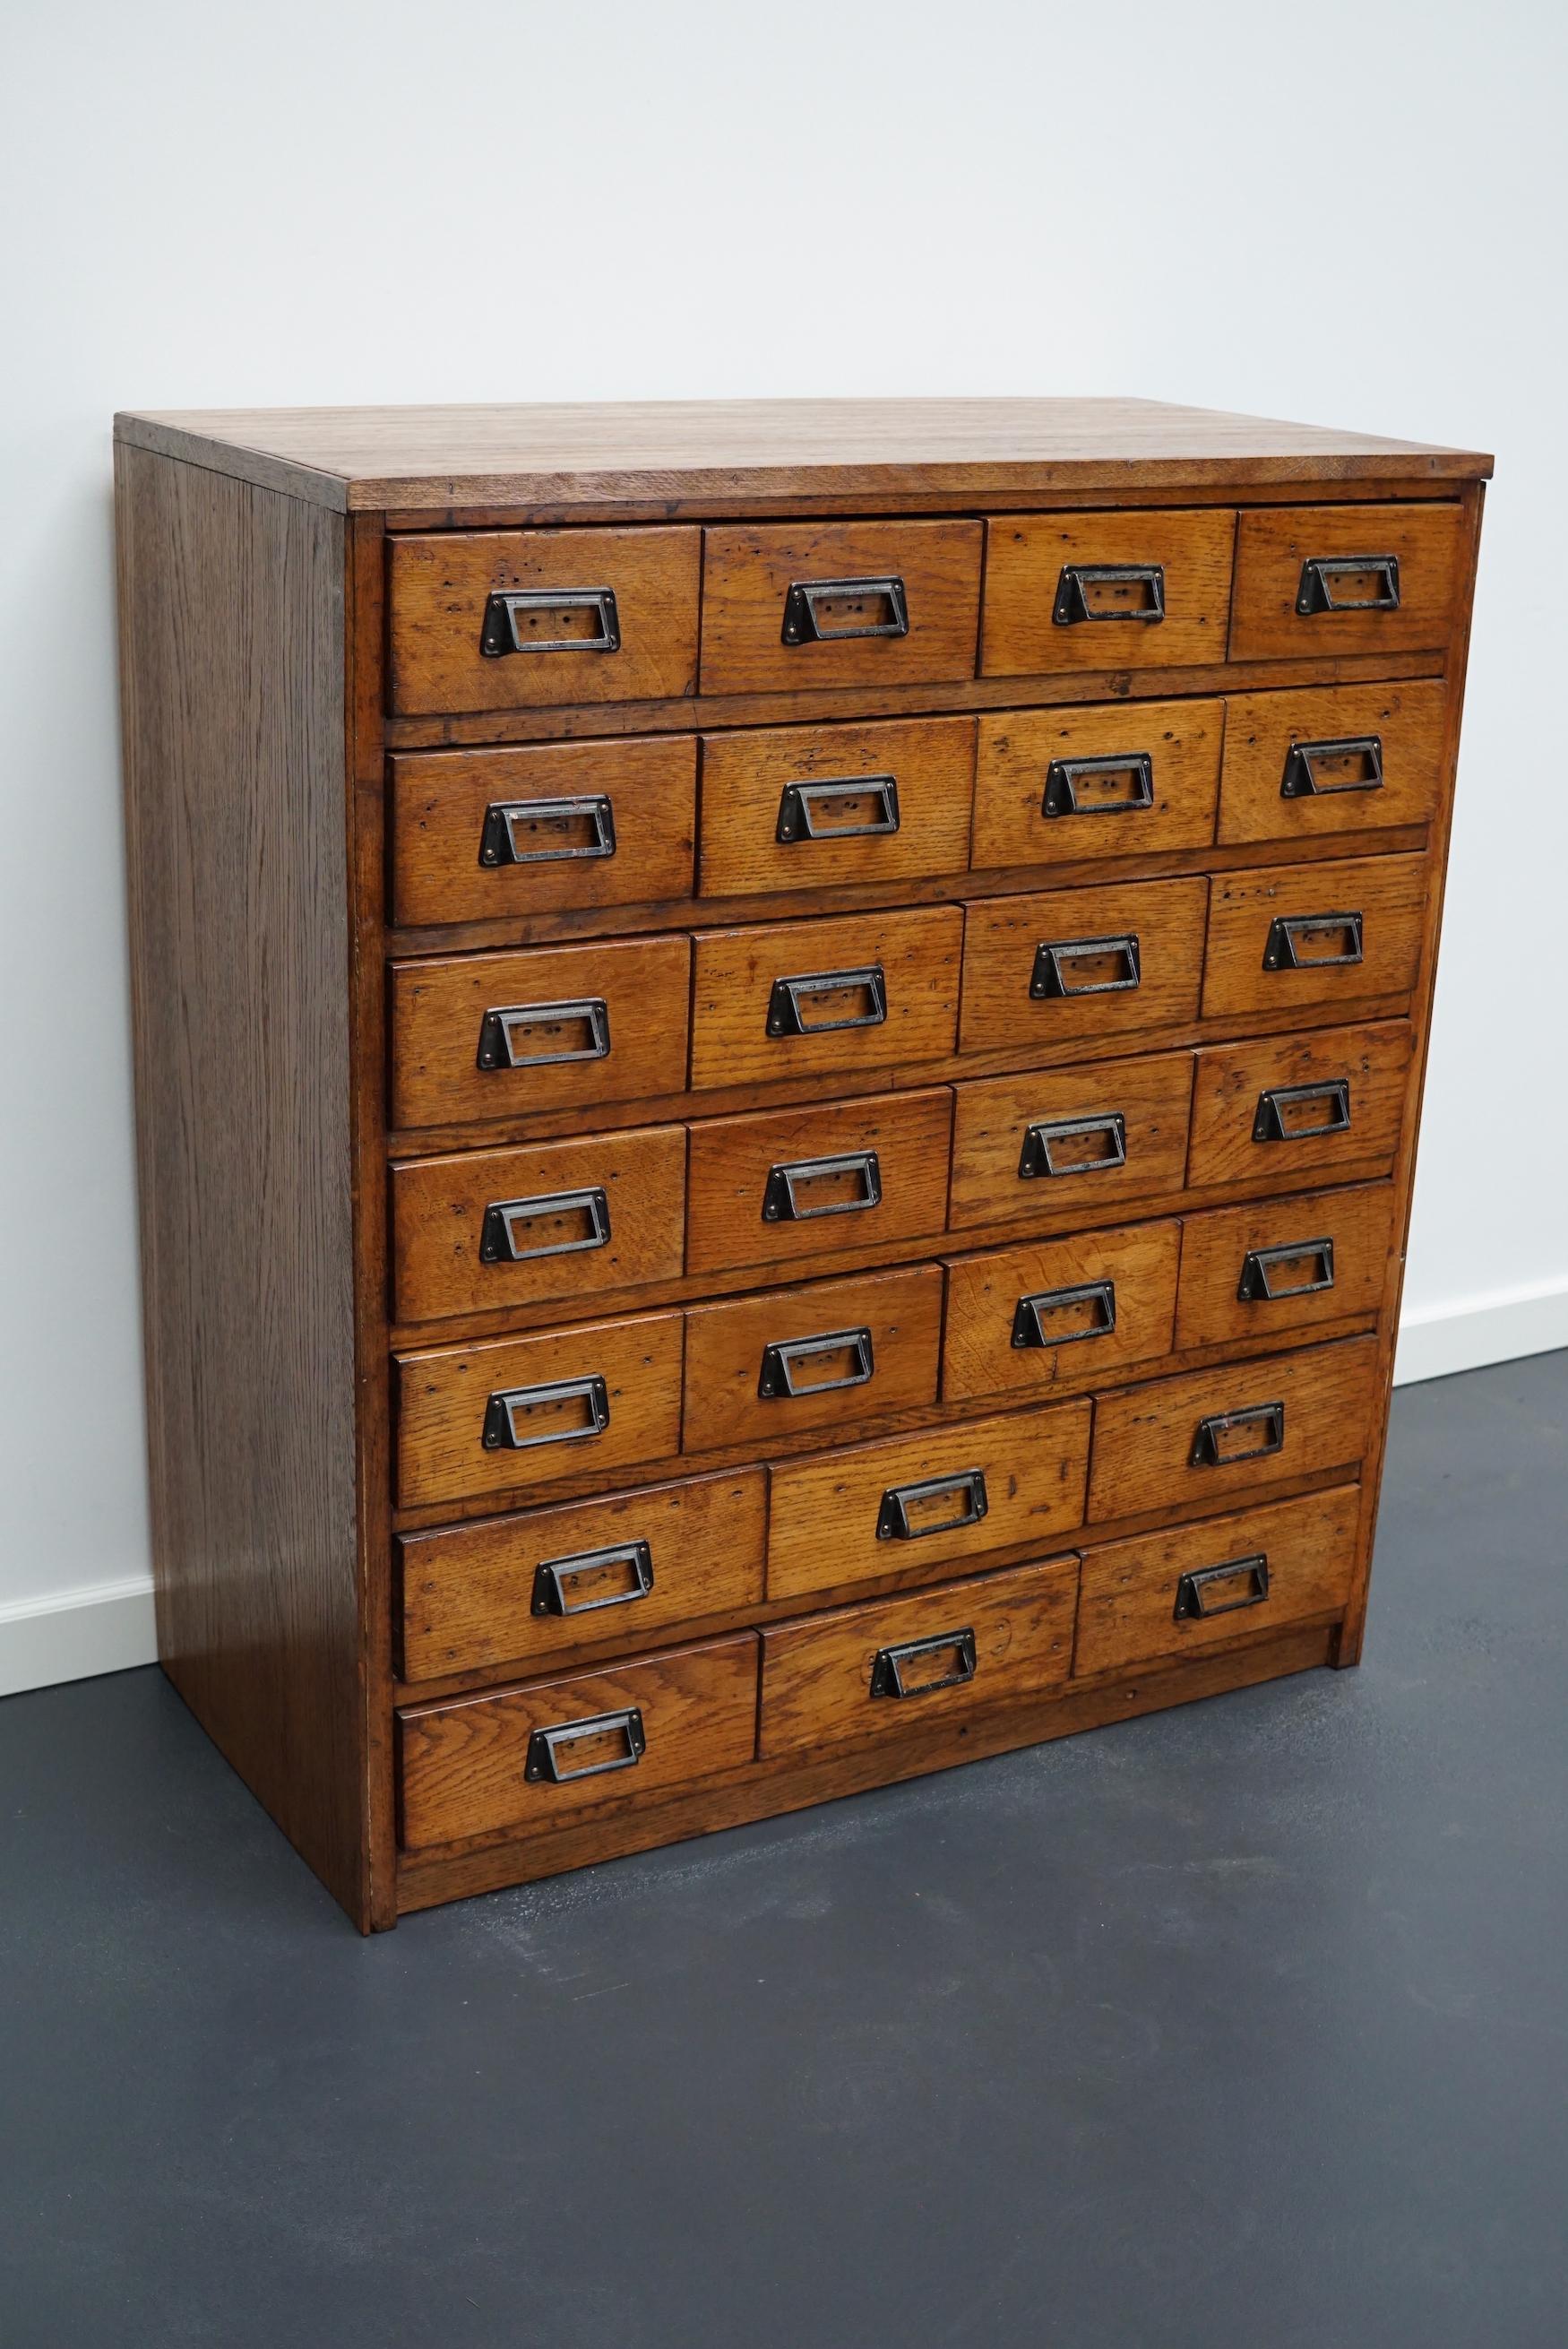 This apothecary cabinet was made circa 1950s in Germany. It features 26 drawers with black metal handles. The interior dimensions of the drawers are: D x W x H 38.5 x 17.5 x 9 cm and 38.5 x 24 x 9 cm.